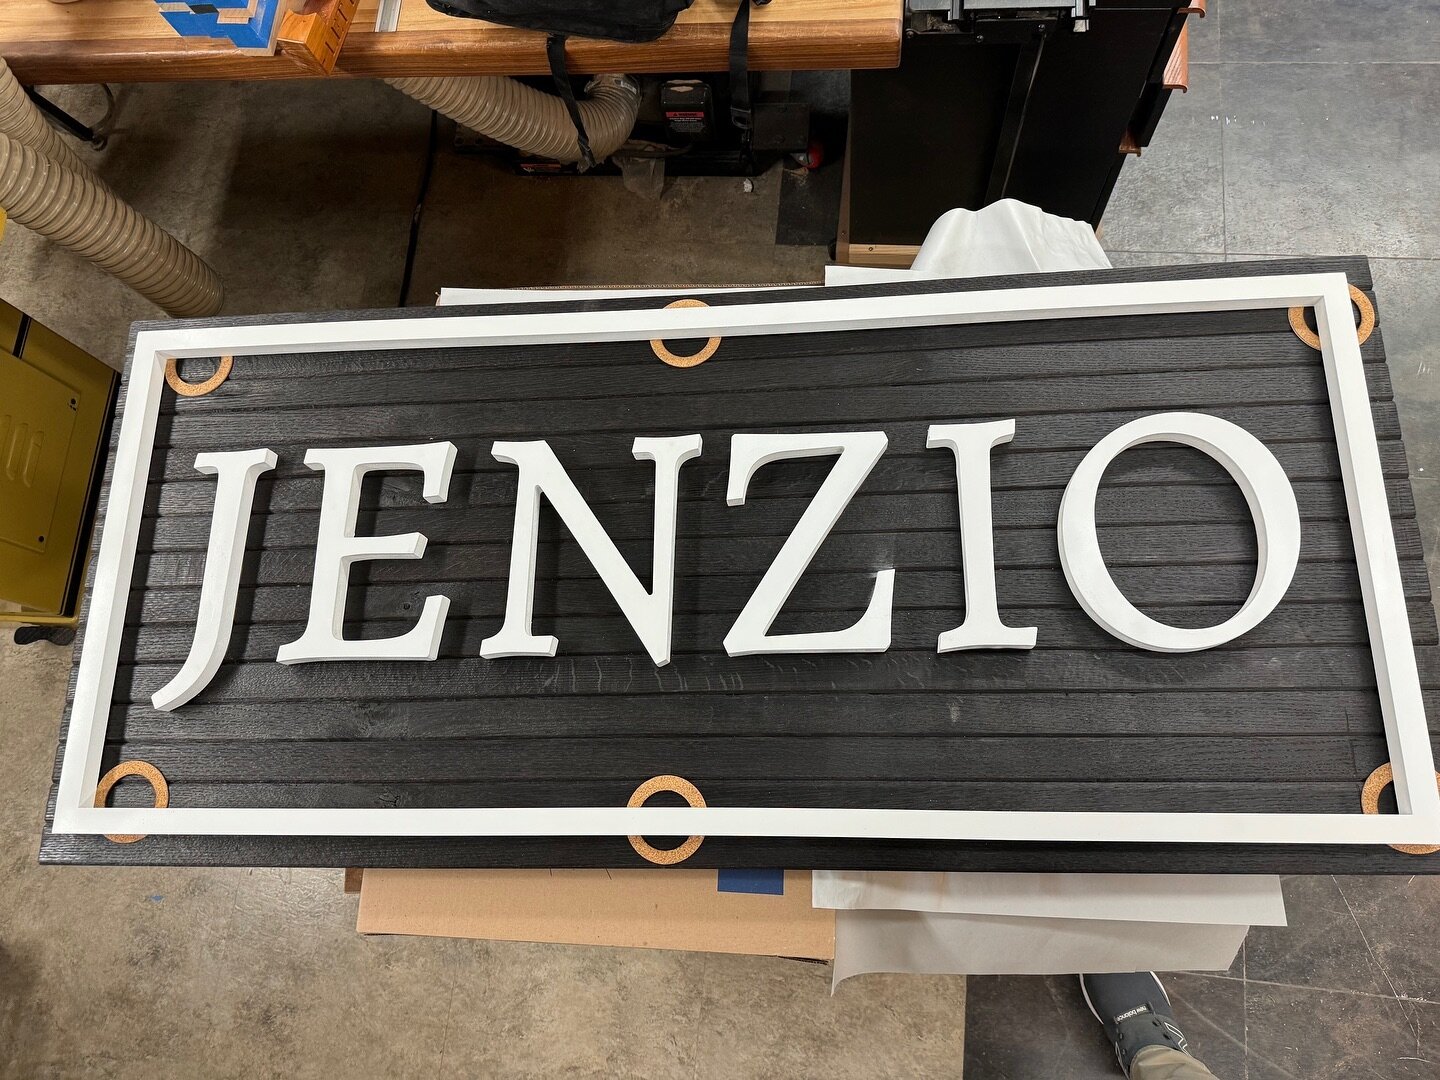 It&rsquo;s all starting to come together!
.
As you can see, it&rsquo;s not quite finished yet..
But what do you think of our SIGN??
.
Made by JENZIO co-owner @savona_woodworks! 👏🏼
.
.
🙏🏼 Please LIKE, SHARE, and FOLLOW to help us get the word out 